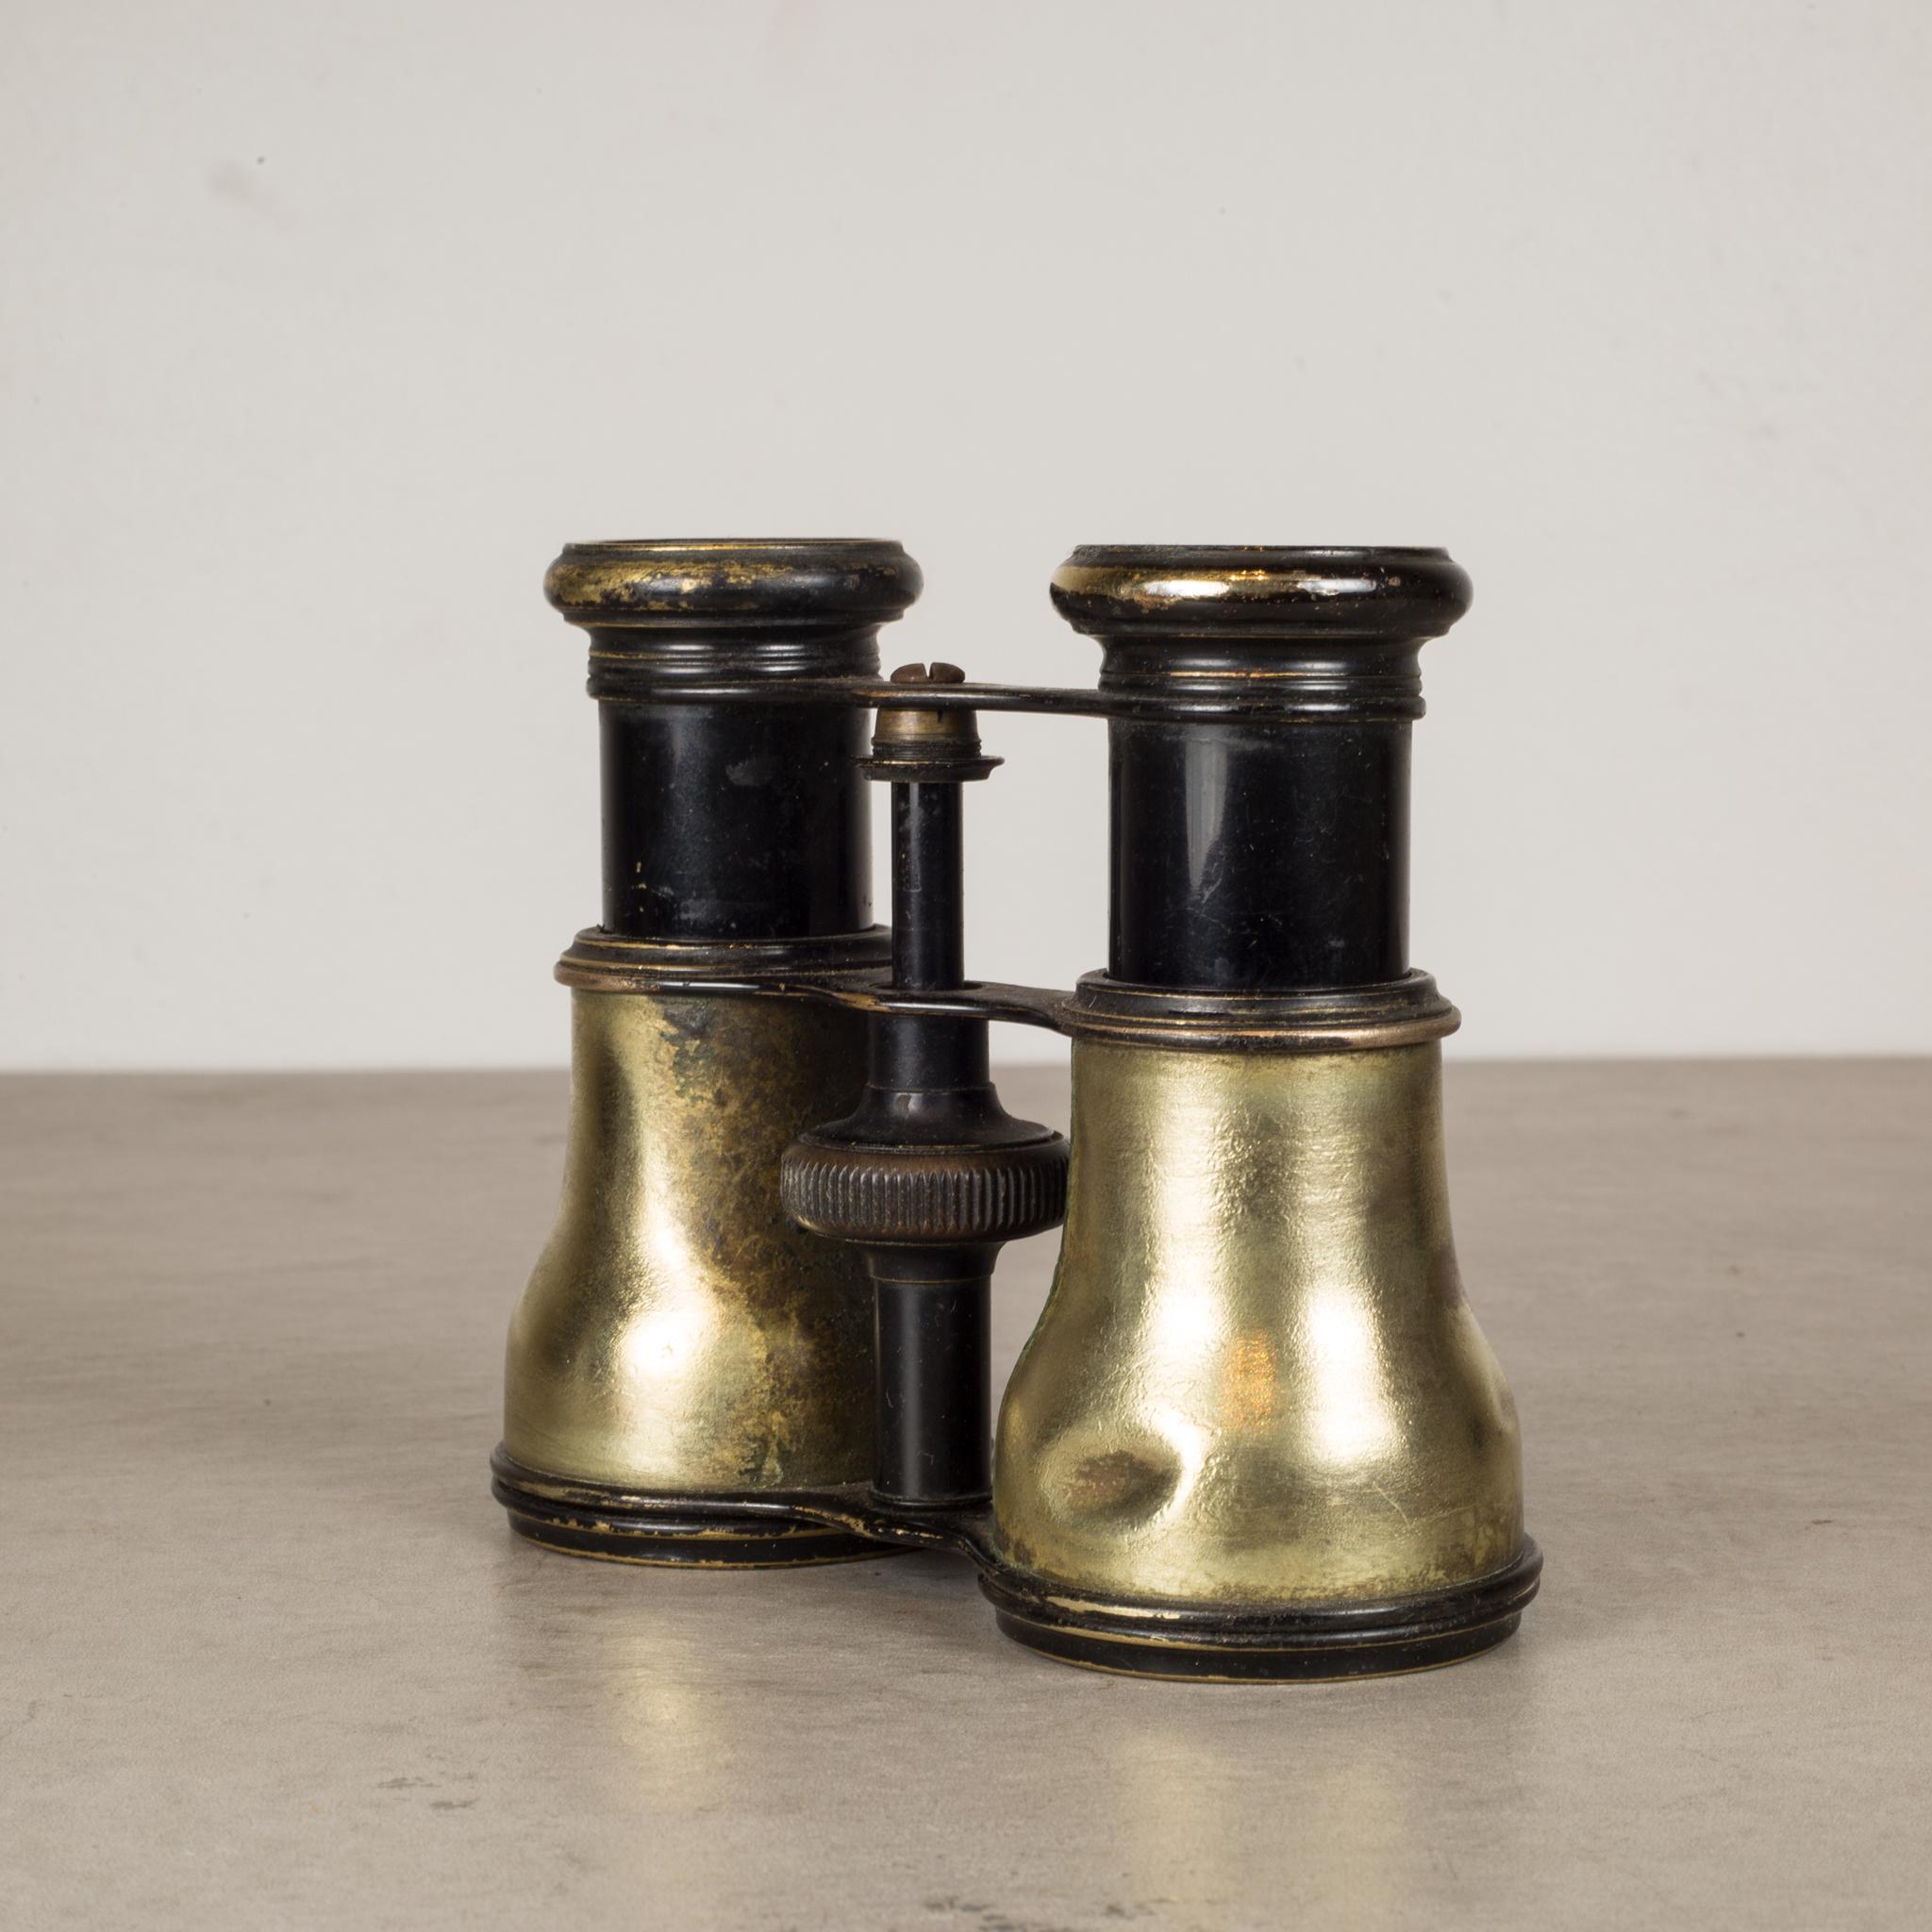 About:

This is an original pair of brass binoculars marked on the eyepiece with 